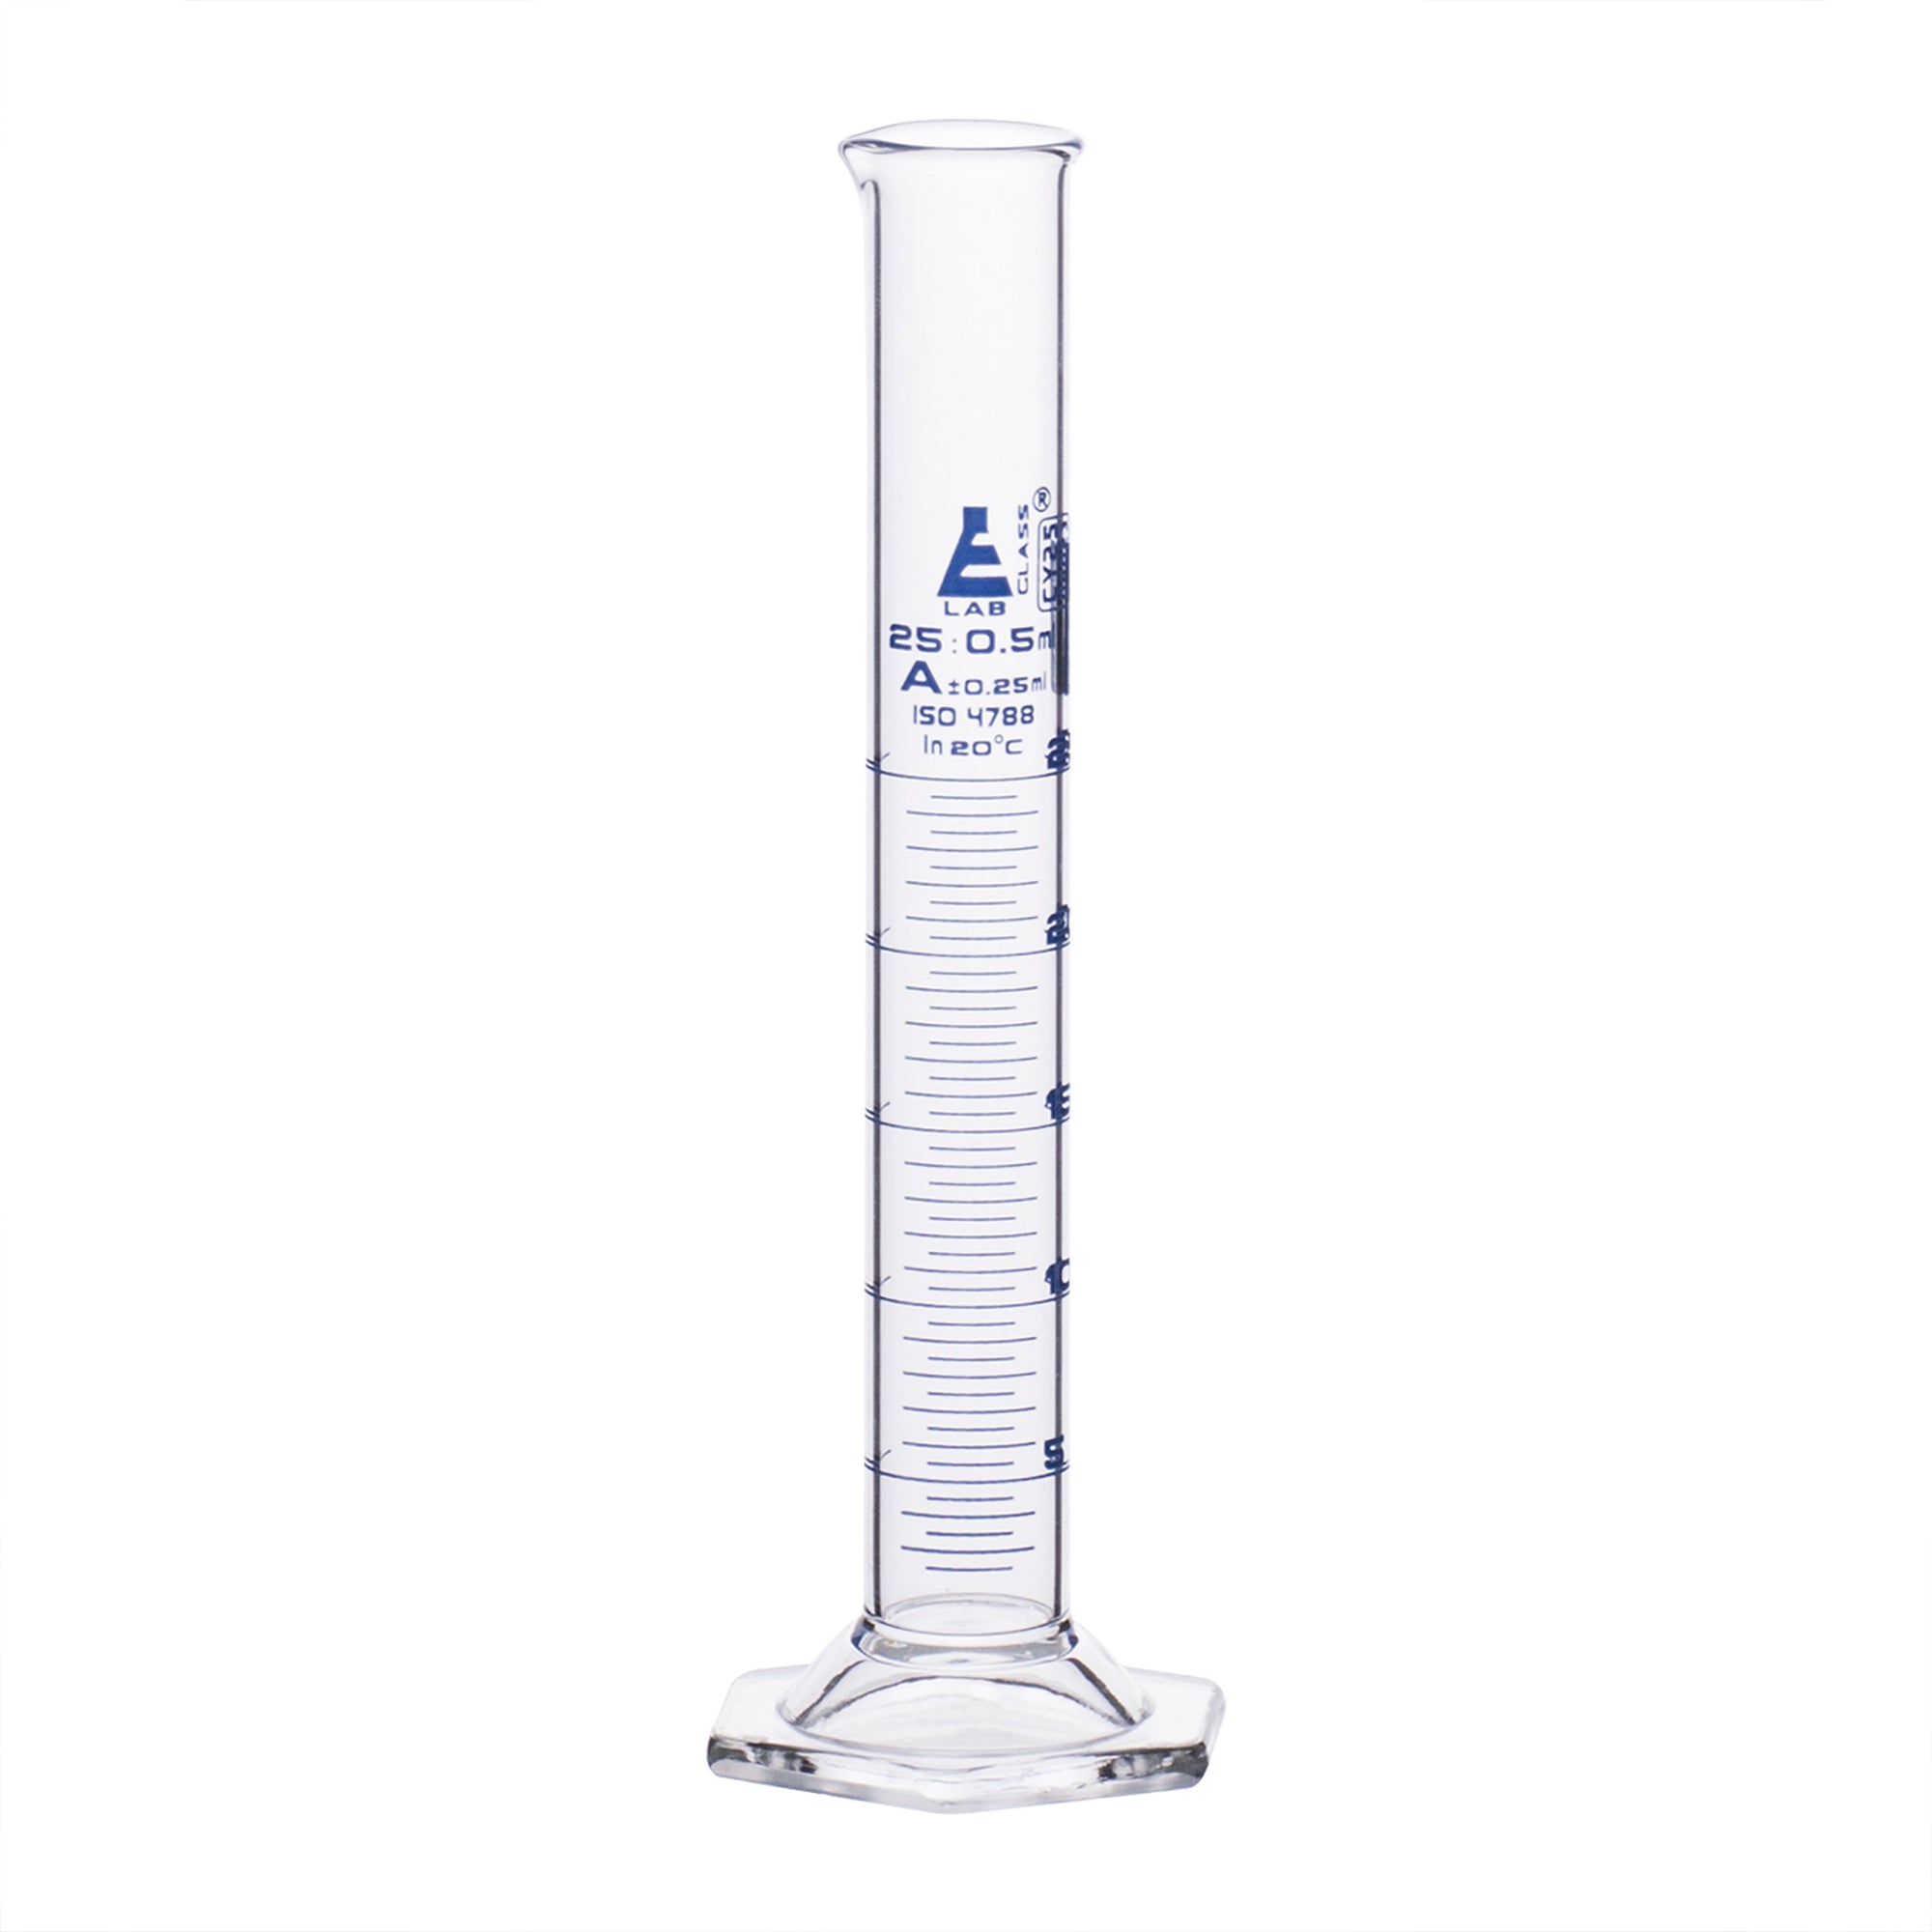 Borosilicate Glass Graduated Cylinder with Hexagonal Base, 25 ml, Class A with Individual Work Certificate